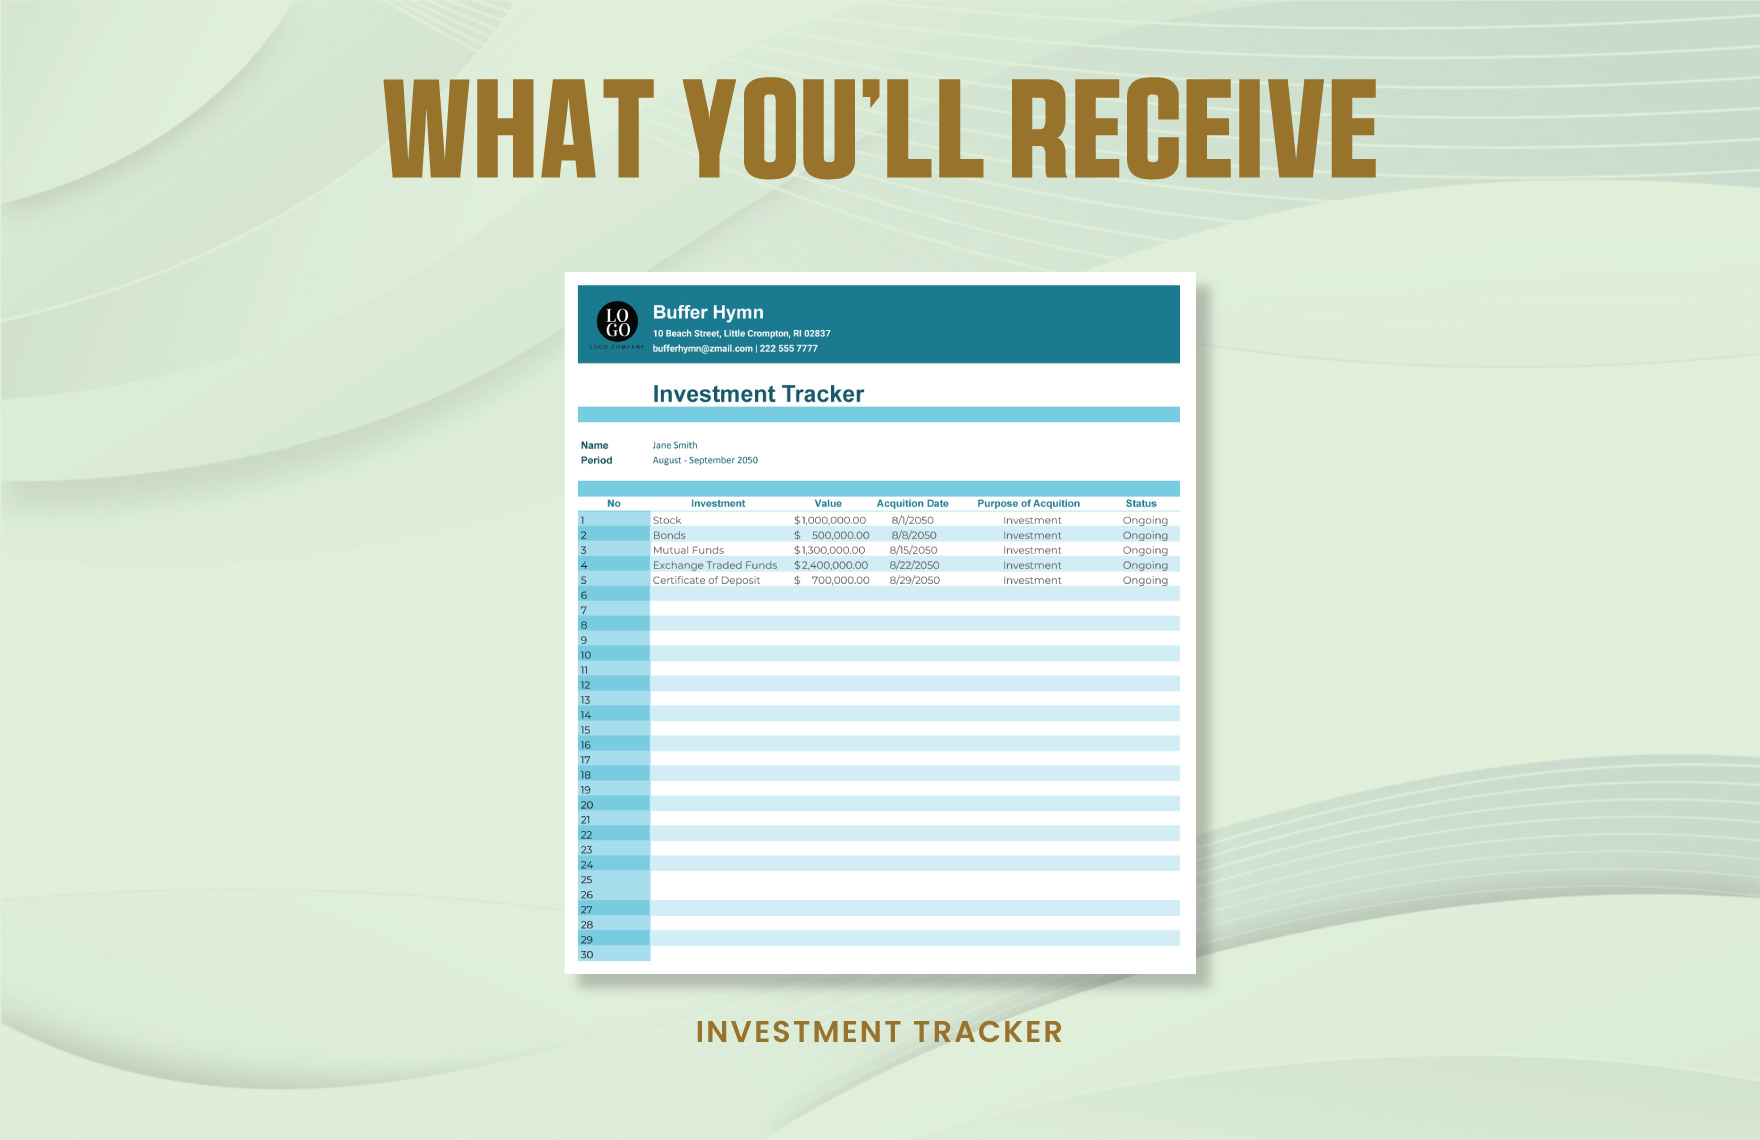 Investment tracker Template